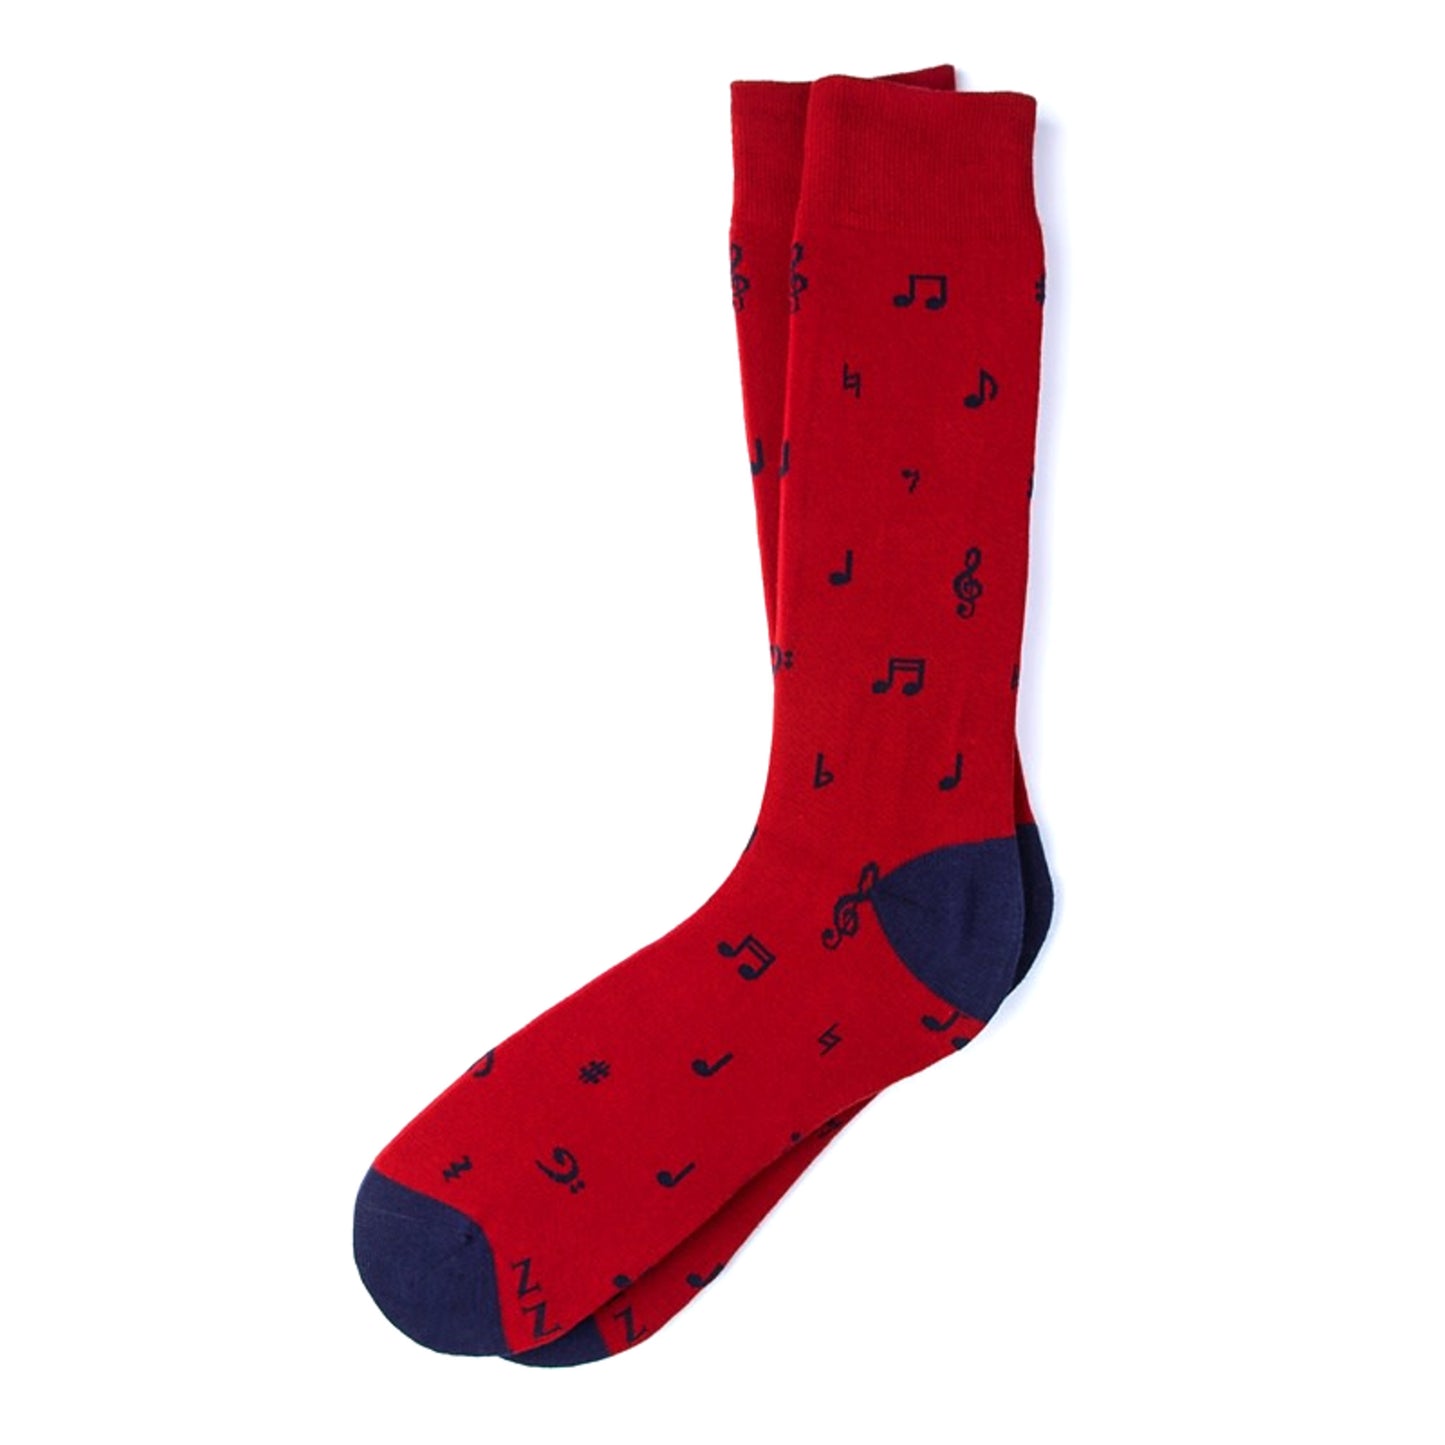 Music to My Toes Men's Socks, Red